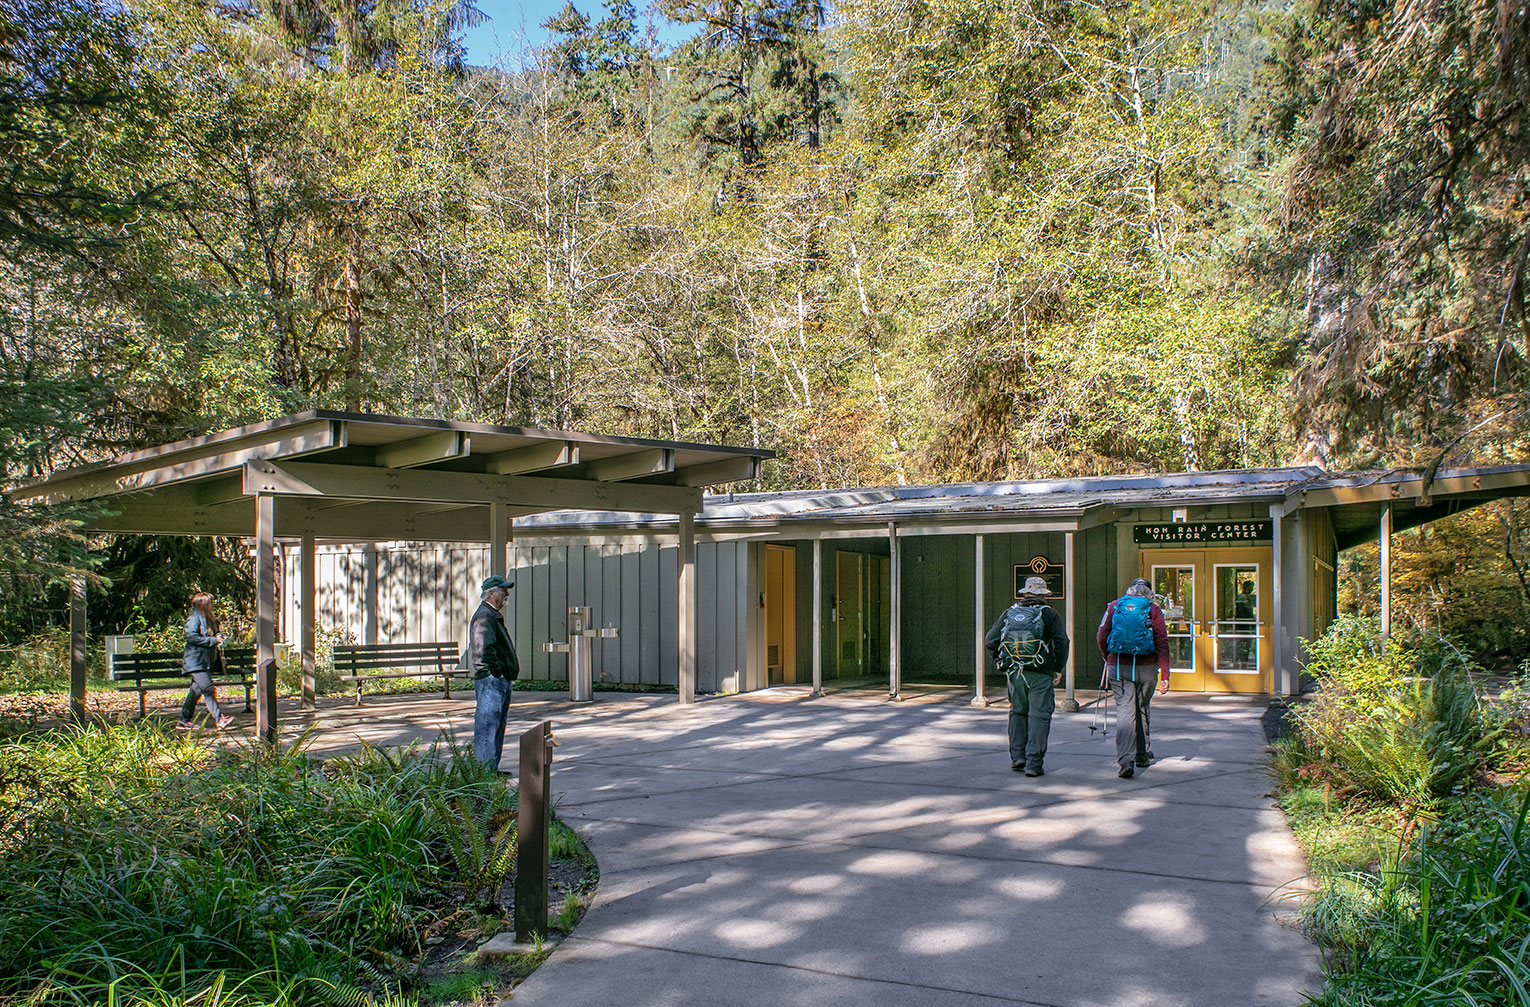 Single story mid-century Hoh Rainforest Visitor Center with outdoor visitor gathering space and plaza. Building is surrounded by a lush rainforest.